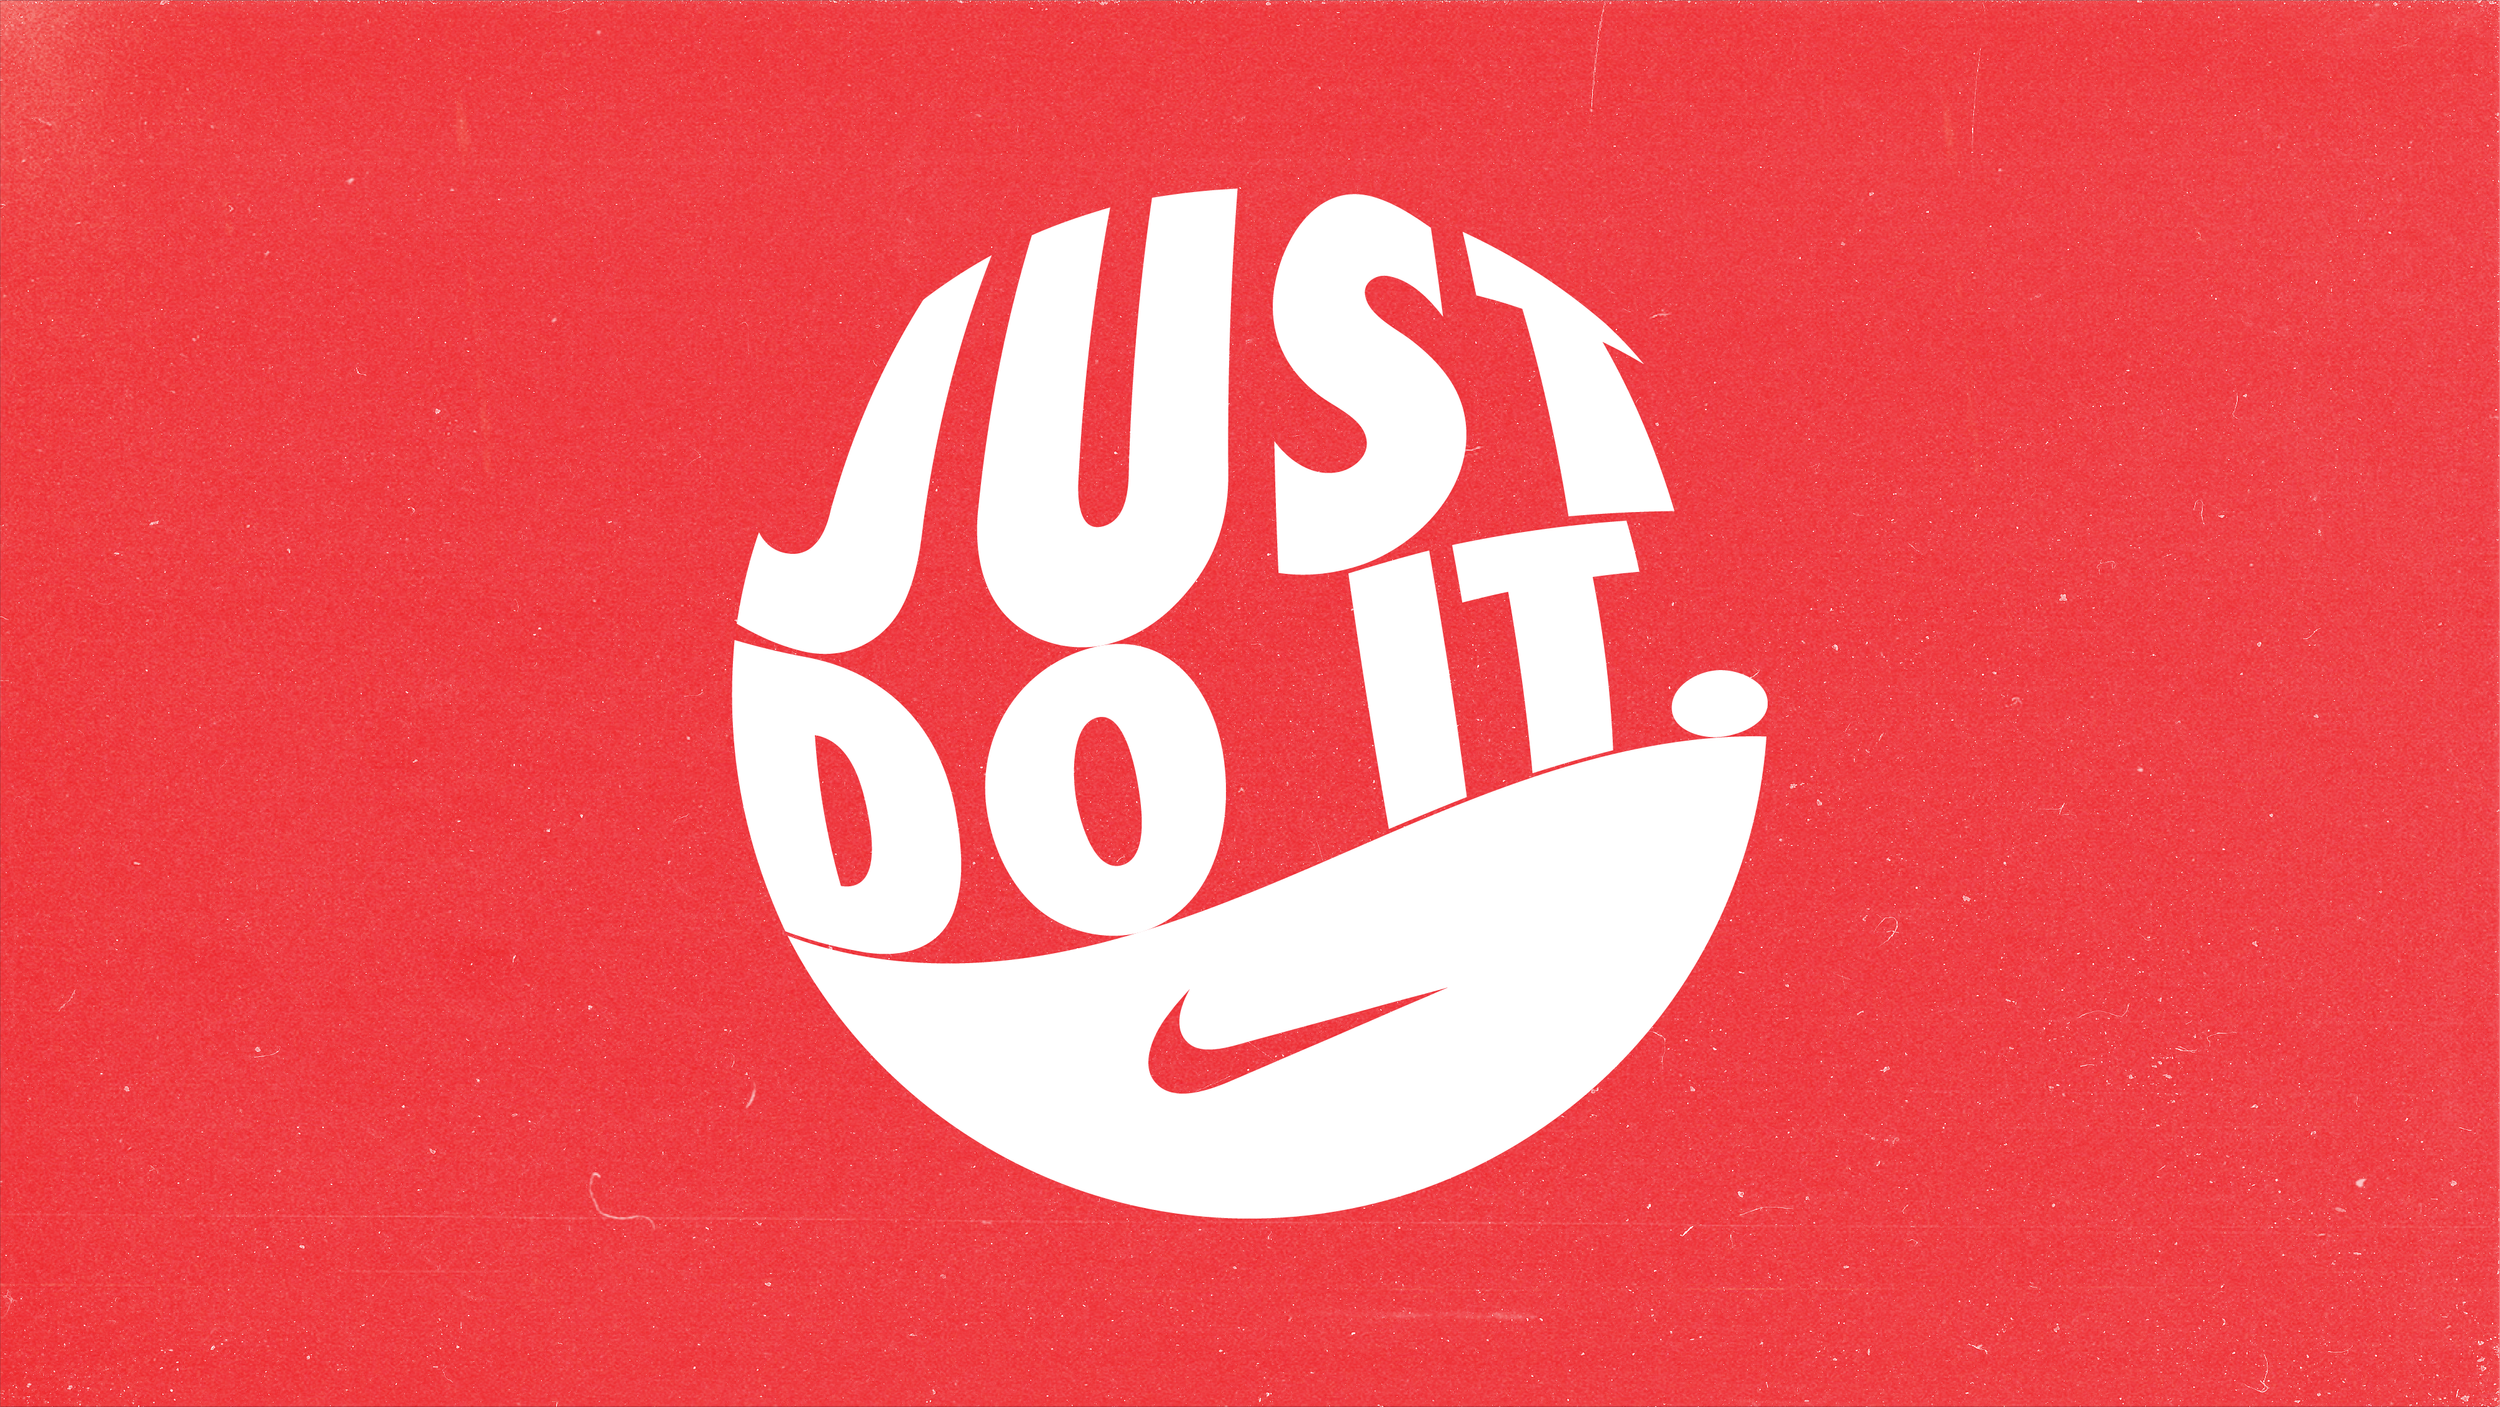 red nike logo just do it